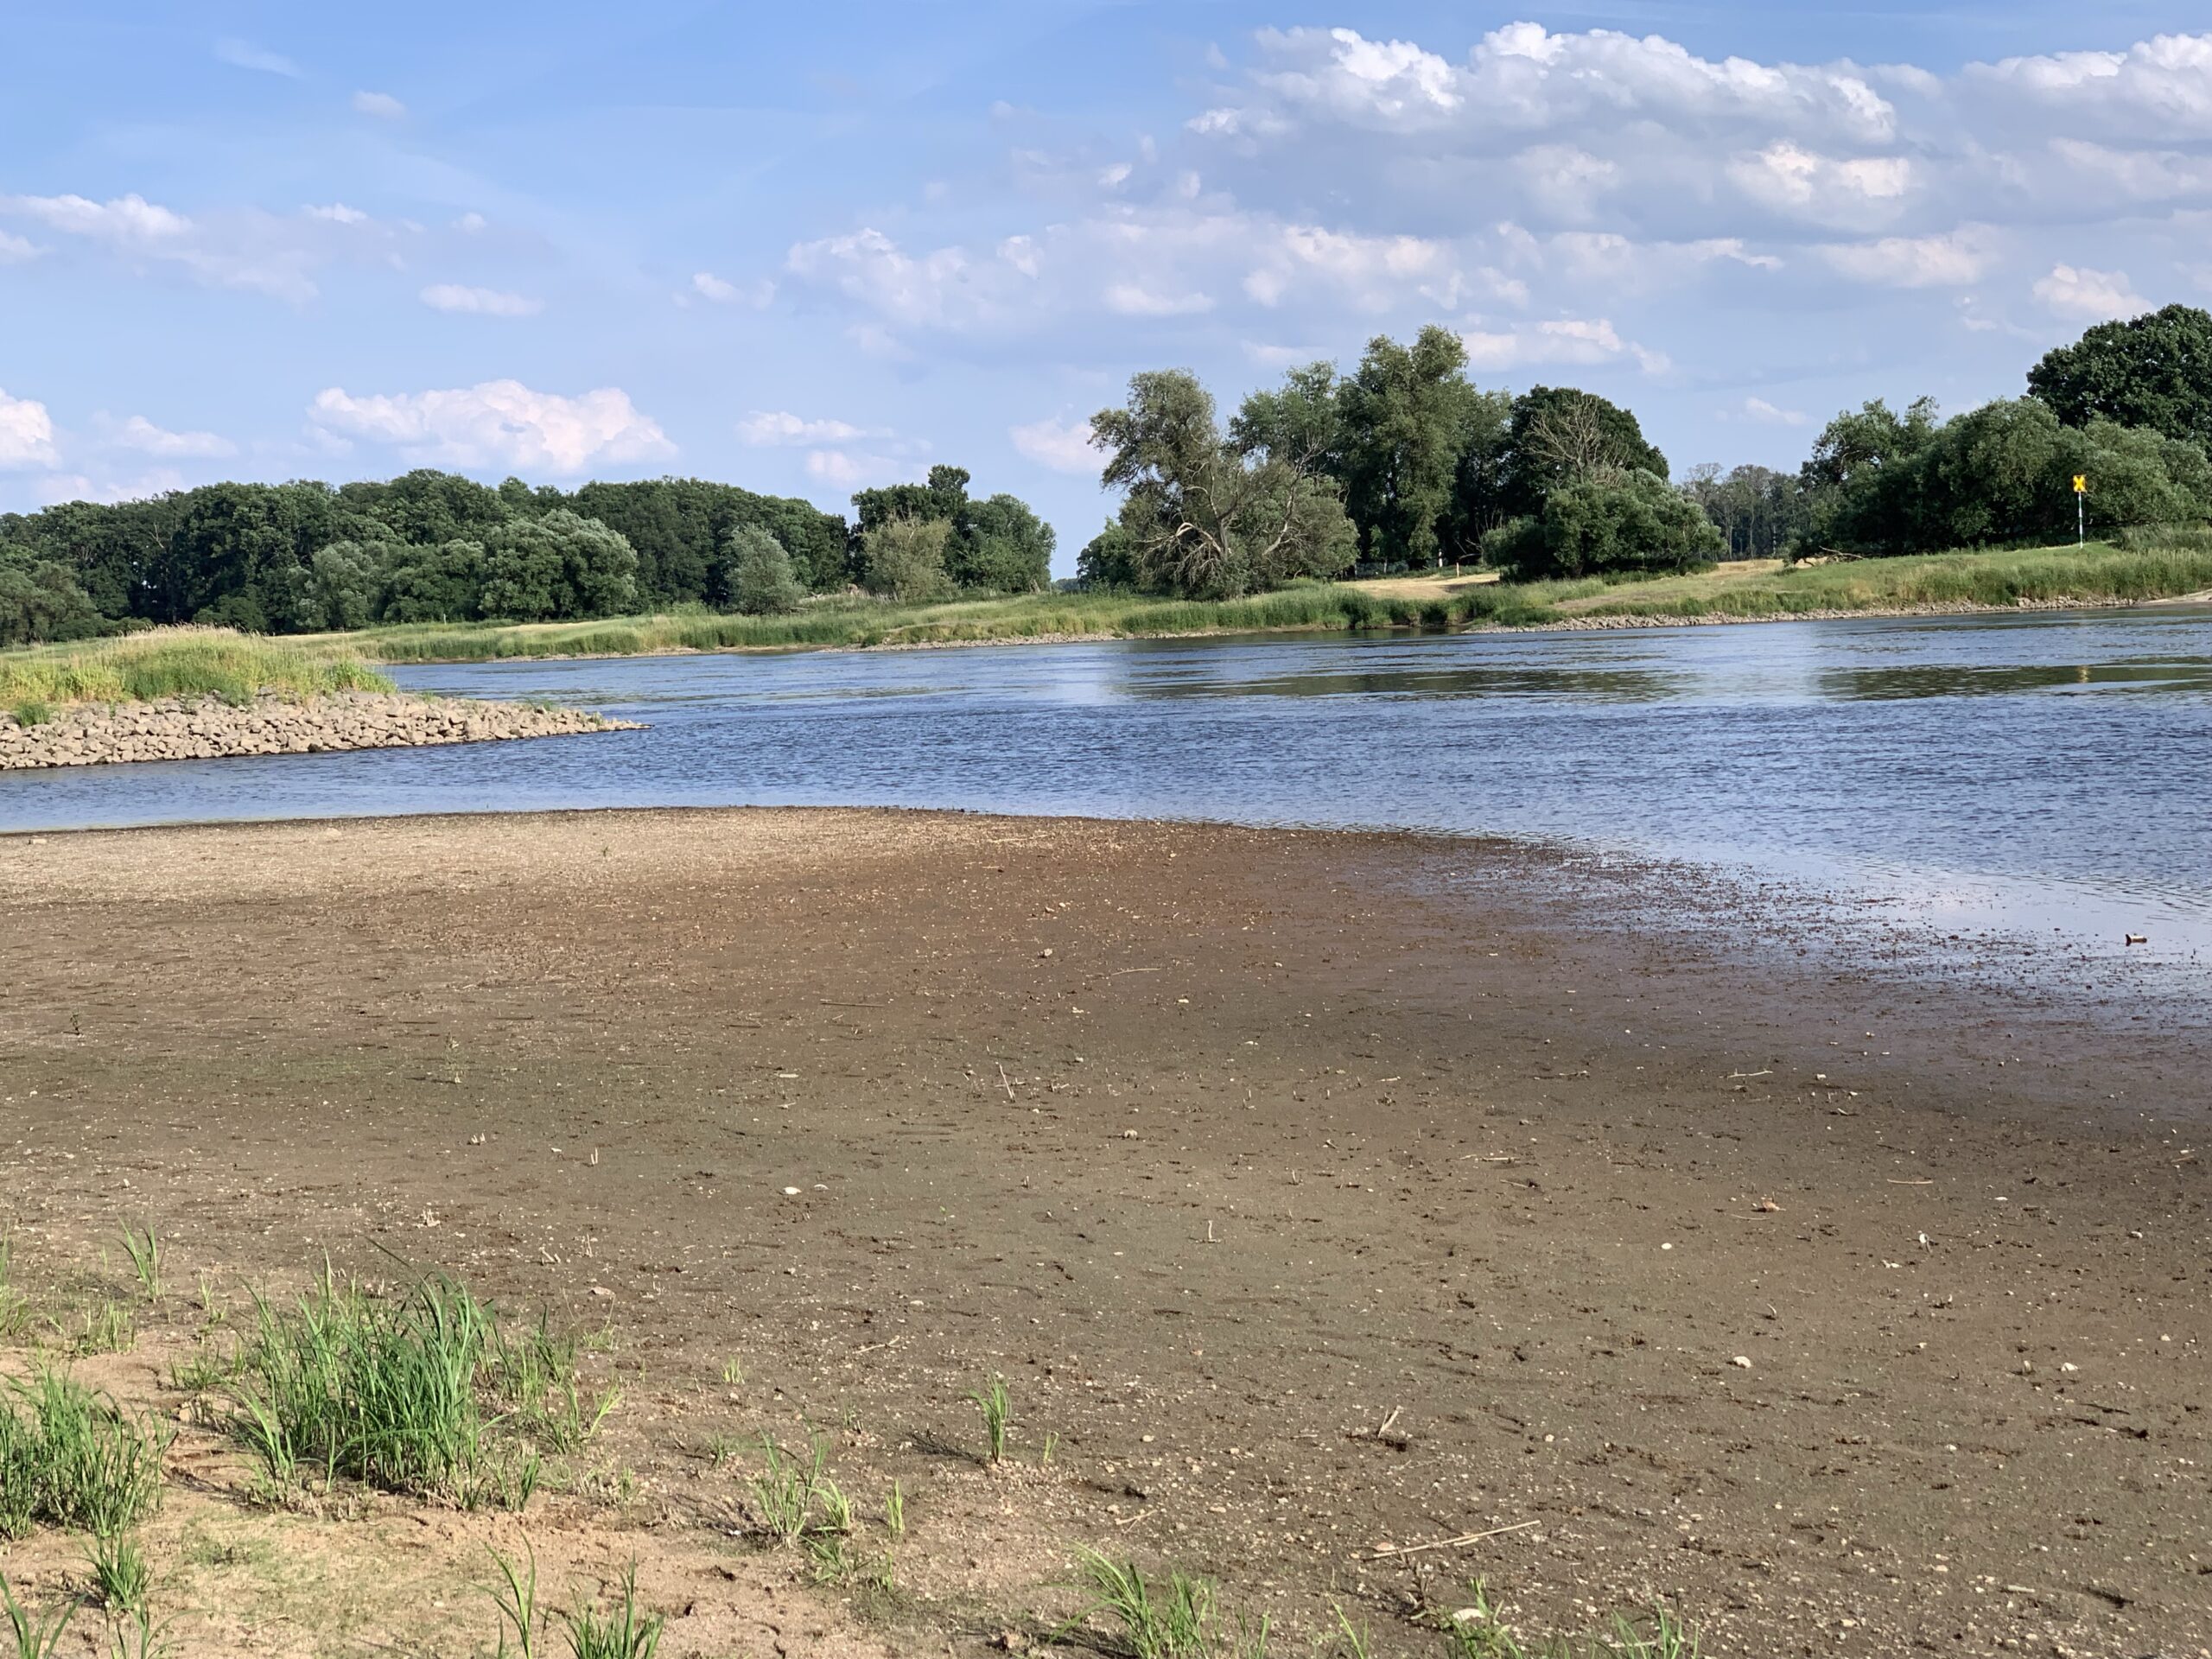 Elbe becomes a “meadow river” near Wittenberg. As to the locals, the water level is now 1.2m below normal